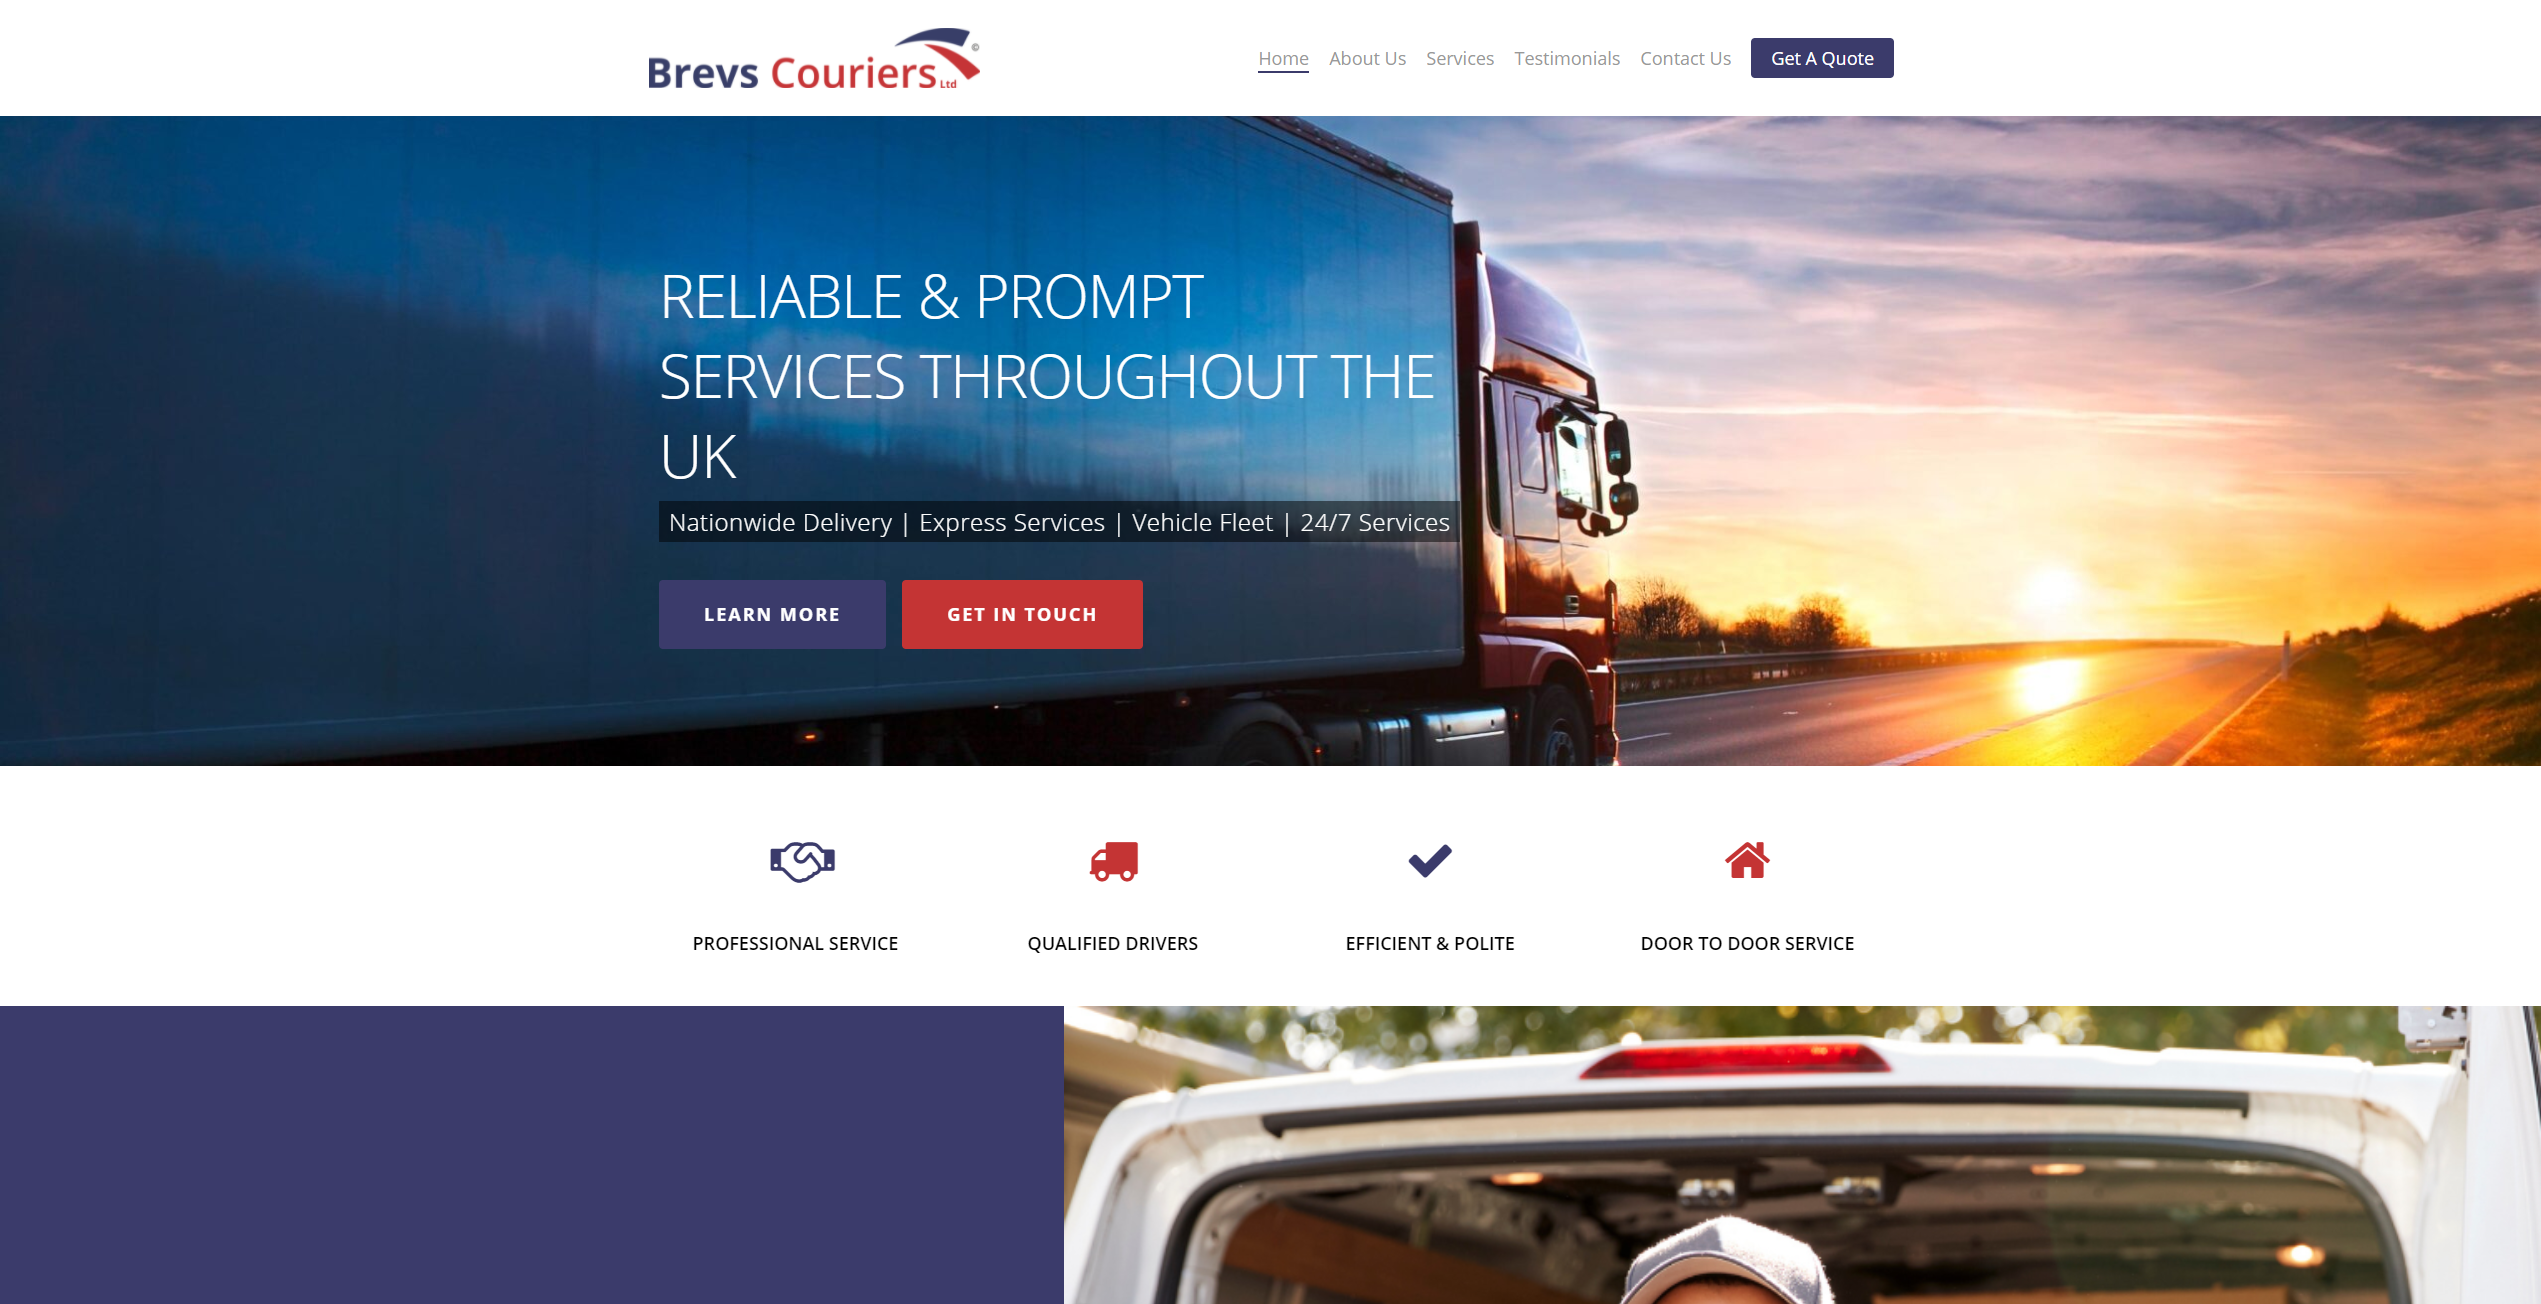 Brevs Couriers